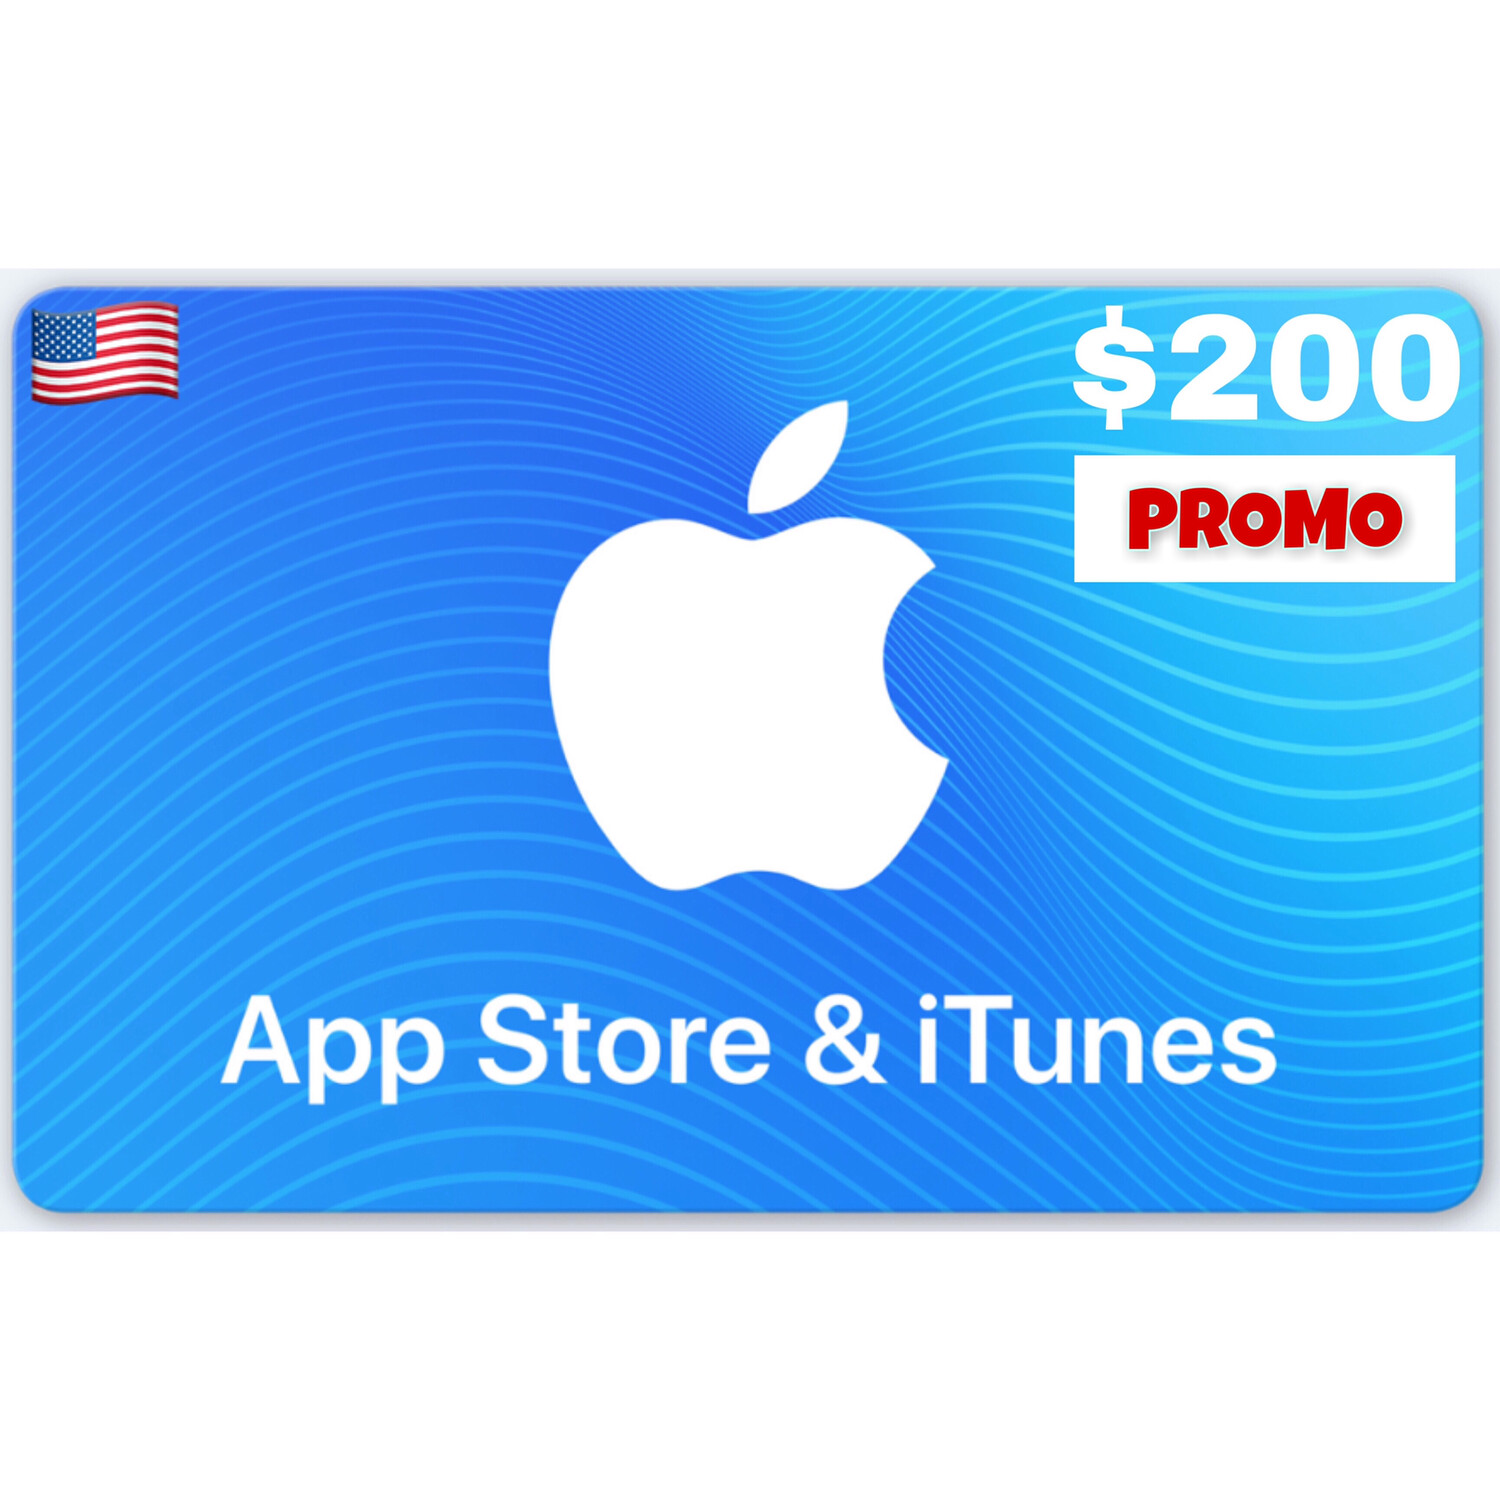 Promo Apple Itunes Gift Card Us 200 - roblox available promo codes december 2018 golden apple